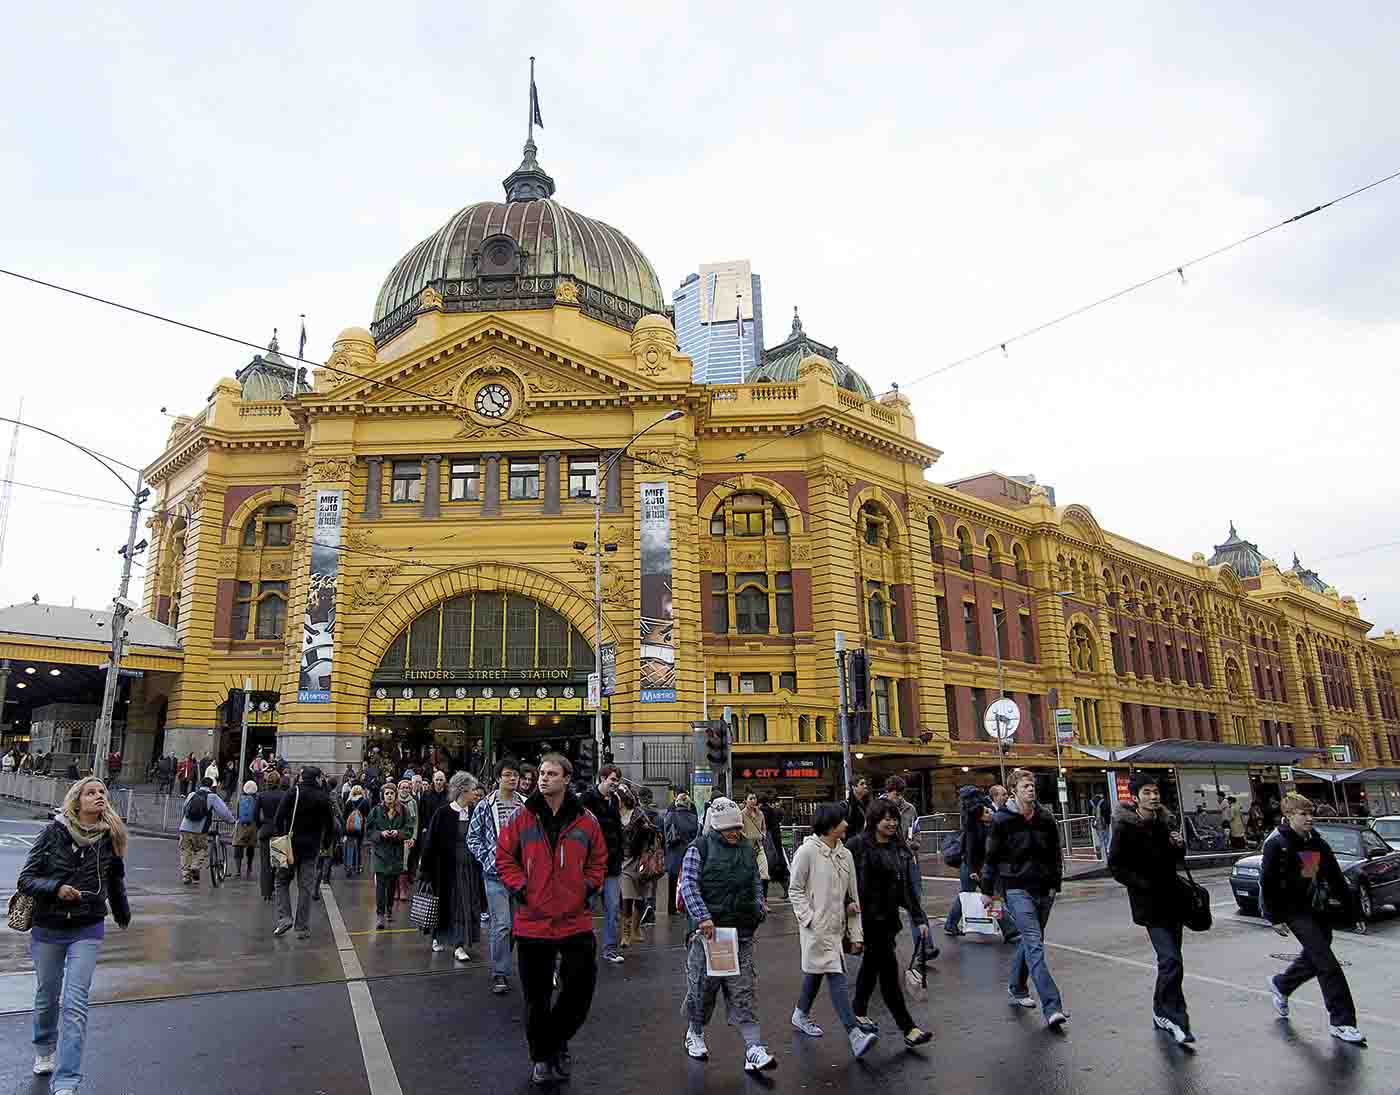 A crowd of people walks across a paved road outside Flinders Street Station, an Edwardian baroque building with a golden-coloured and red brick facade. Tram lines extend in various directions above the road.